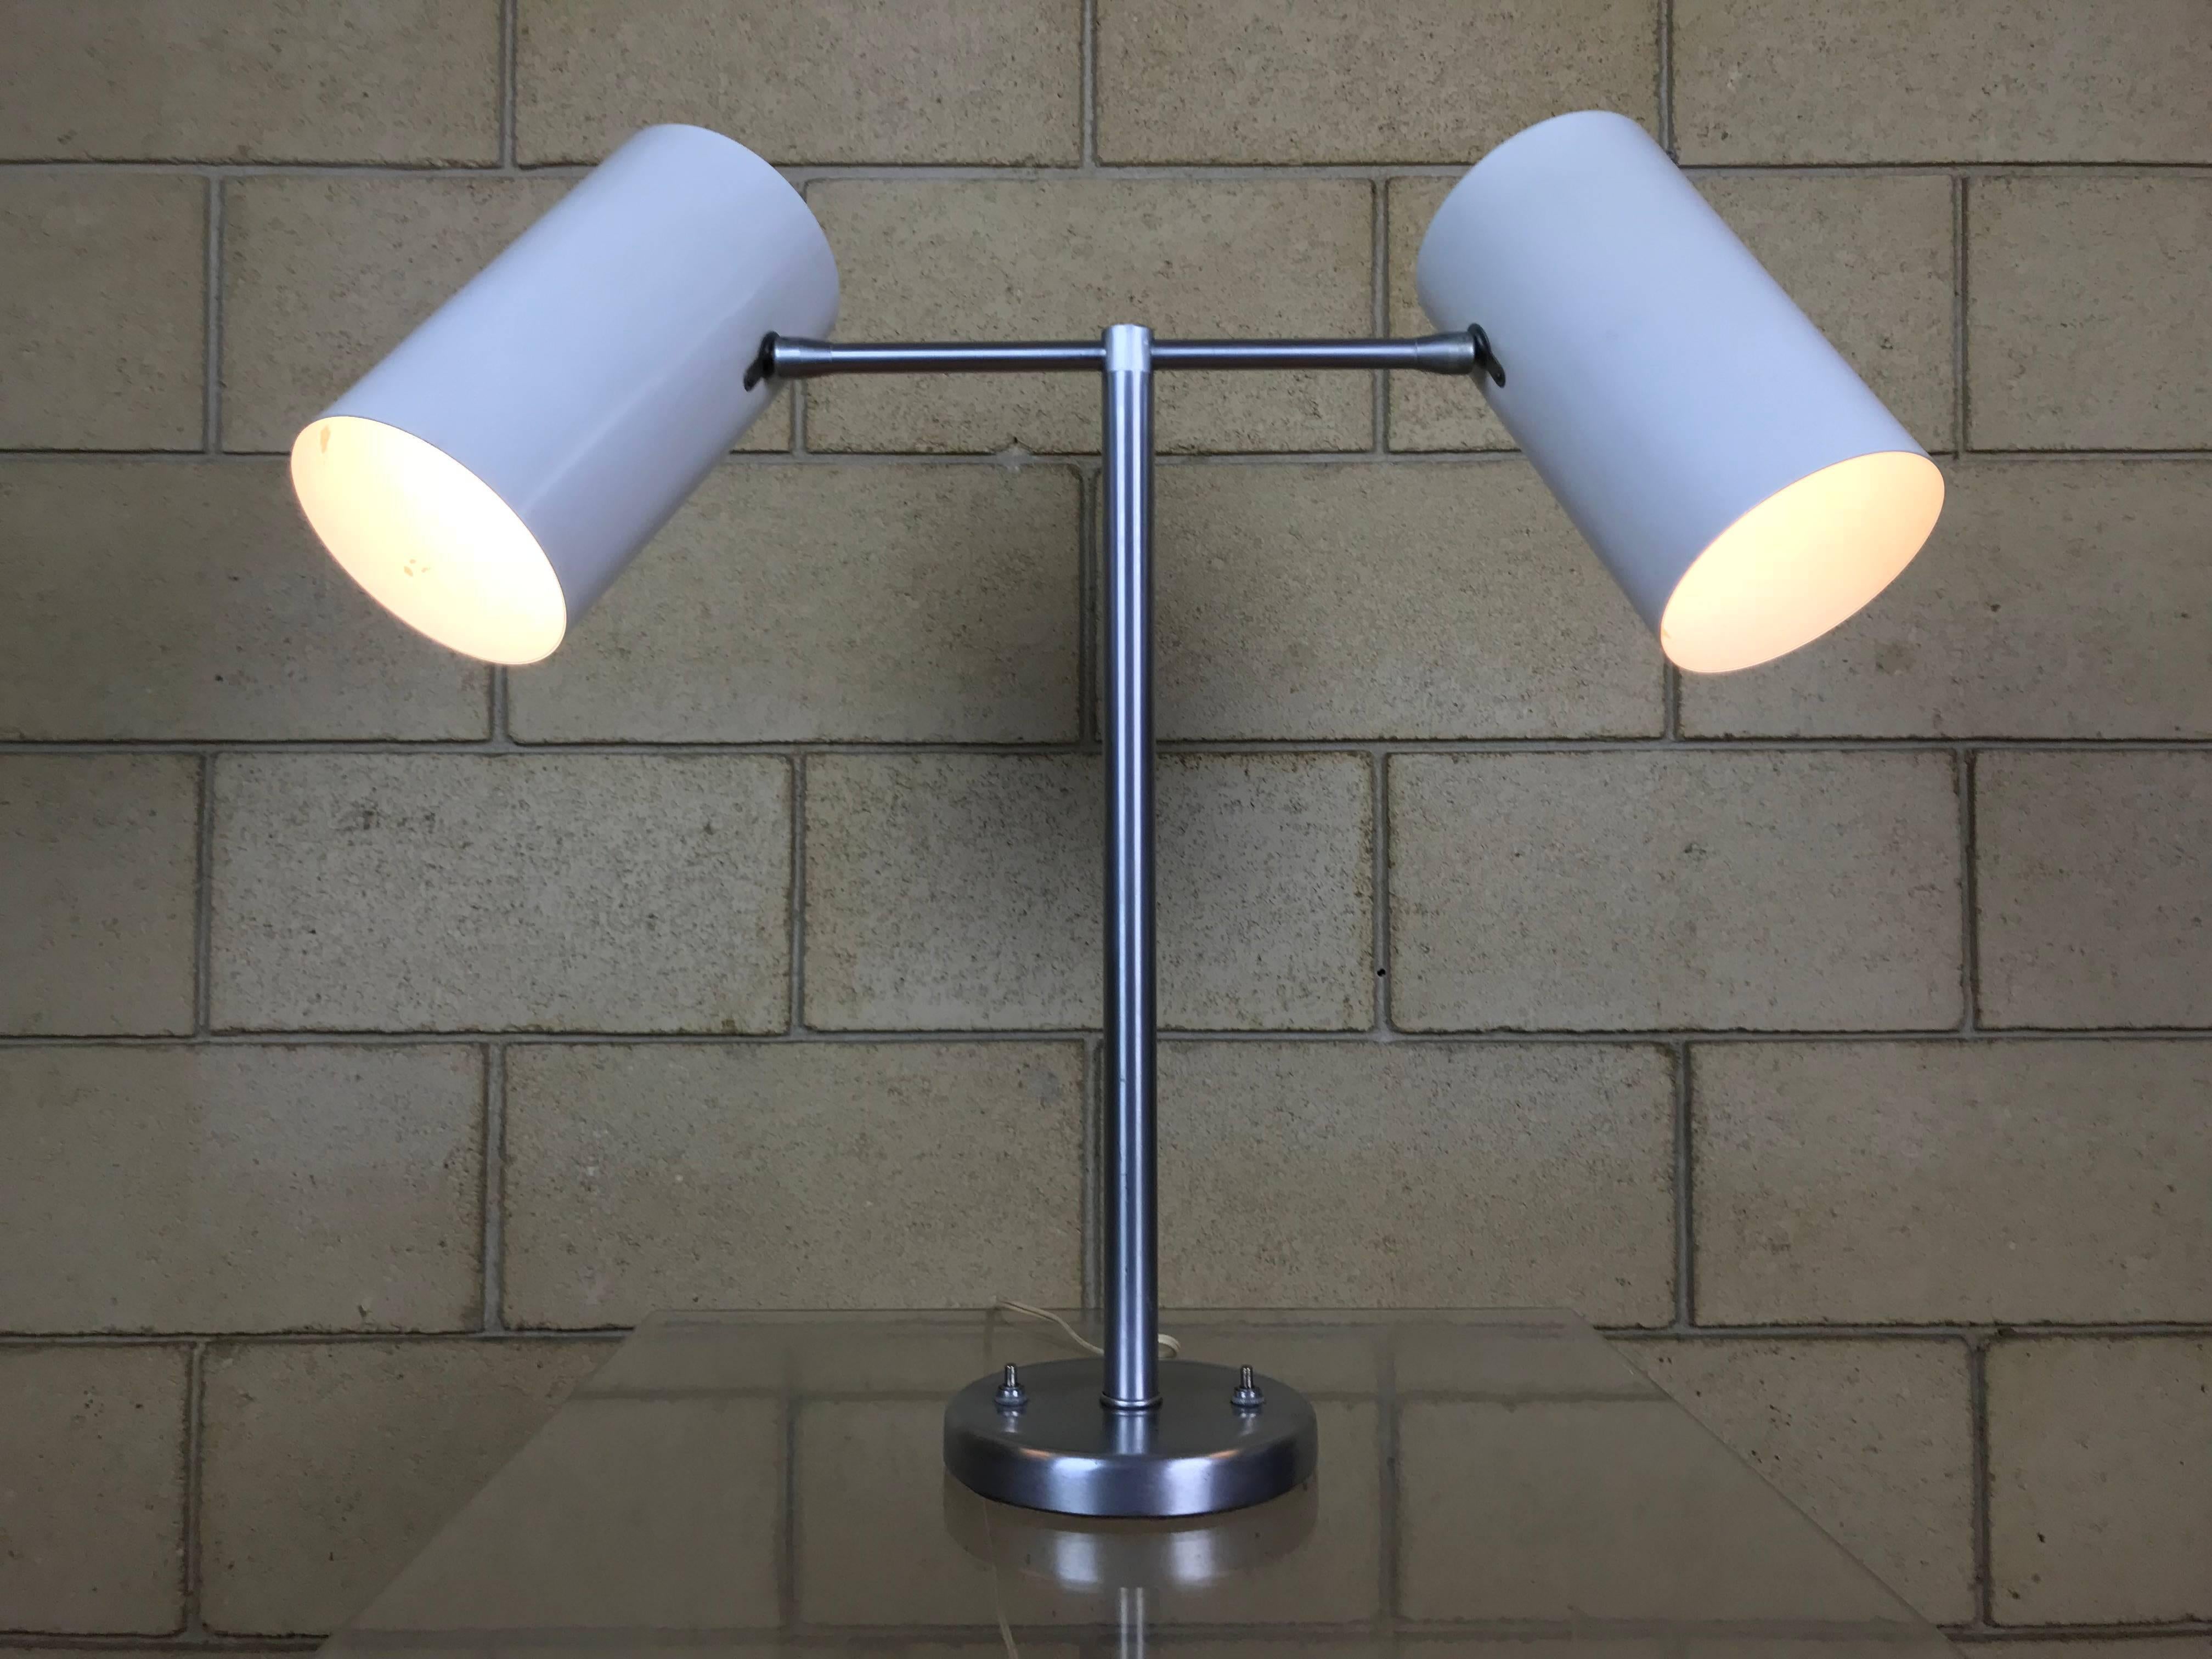 This is a very clean example of modernist design by Walter Von Nessen - the desk lamp has only been cleaned - it is completely original. Each cylinder pivots in all directions to provide light where you want, and has switches on the base that can